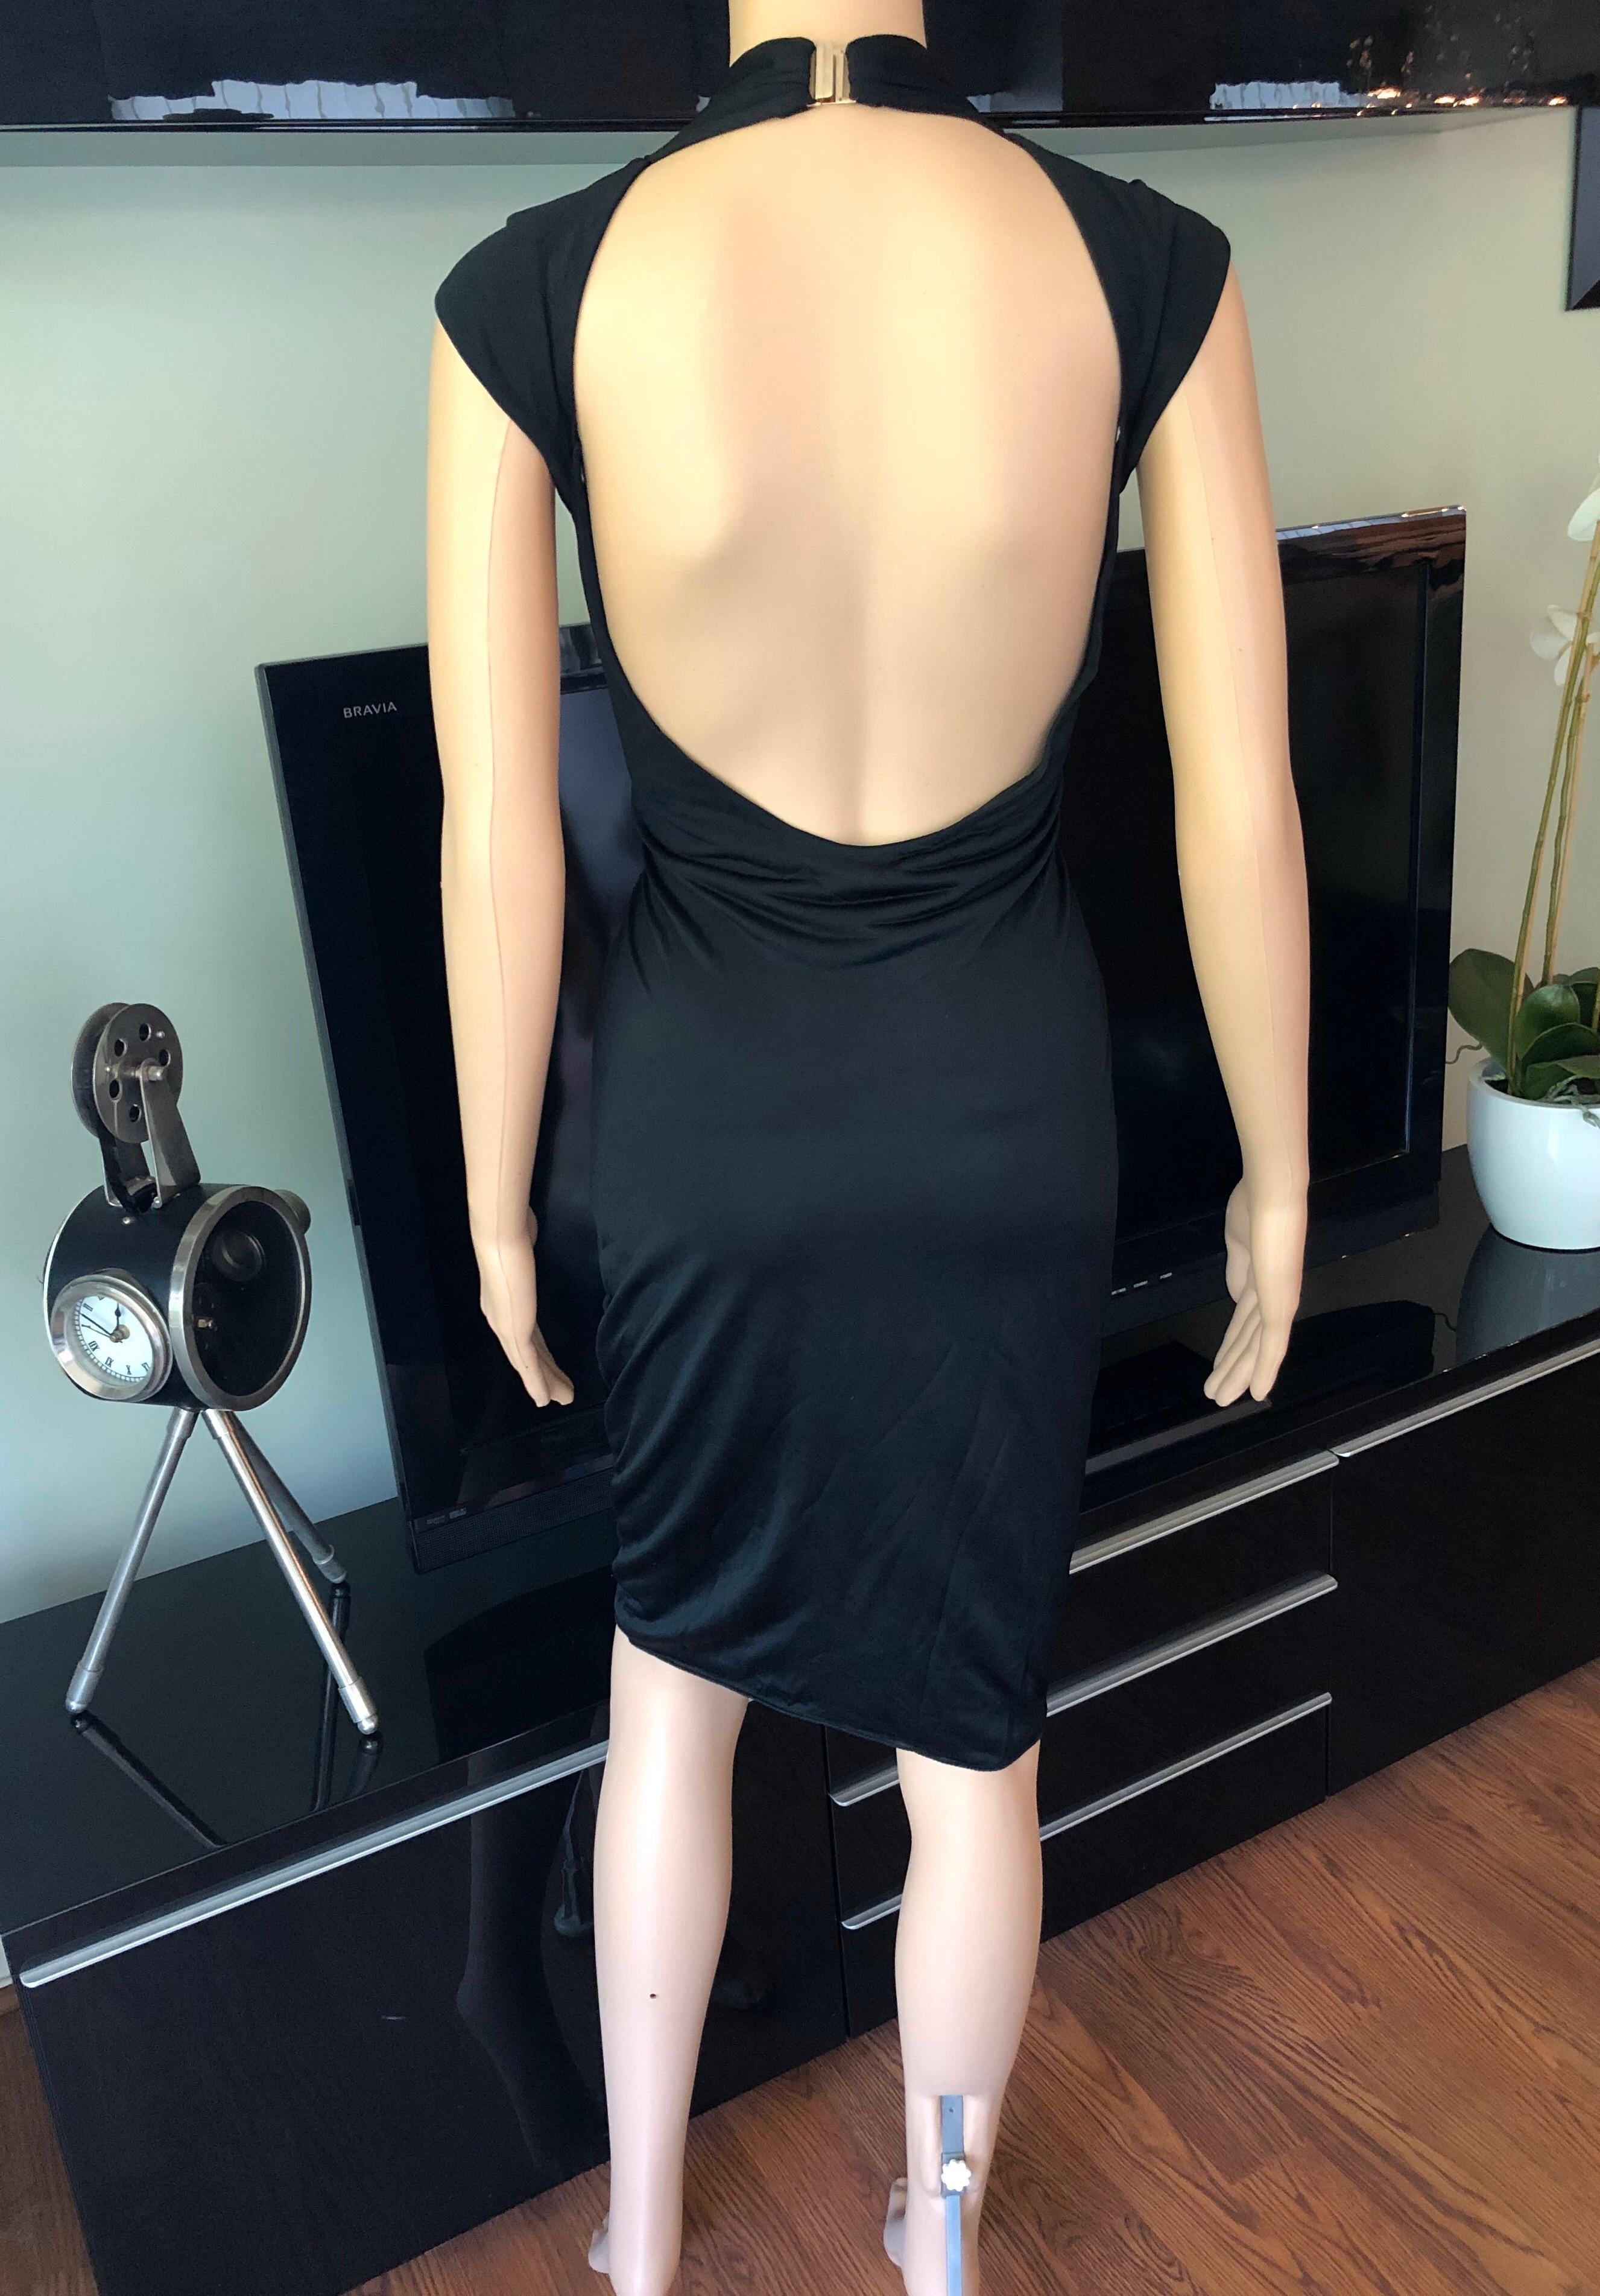 Tom Ford for Gucci Keyhole Cutout Back Black Dress XS

Gucci short sleeve dress with keyhole at front, cutout open back and hook-and-eye closure at neckline.